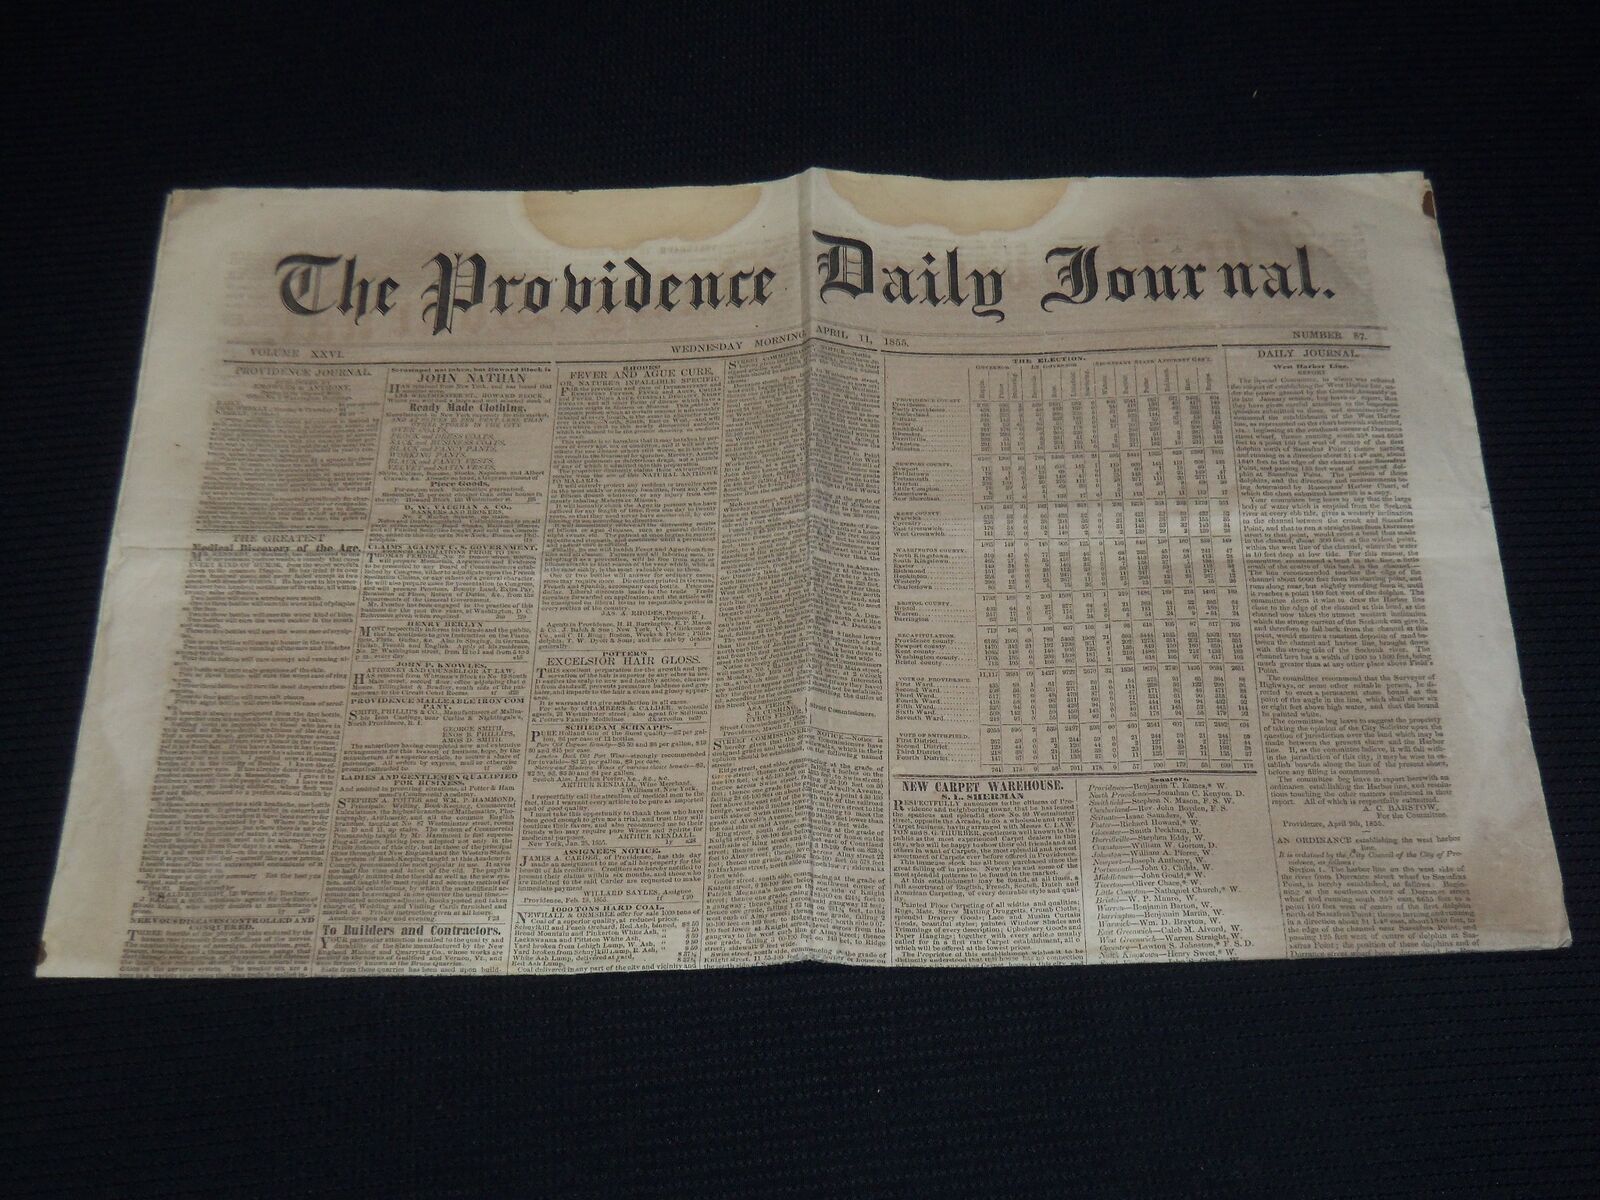 1855 APRIL 11 THE PROVIDENCE DAILY JOURNAL NEWSPAPER - THE ELECTION - NP 3877D